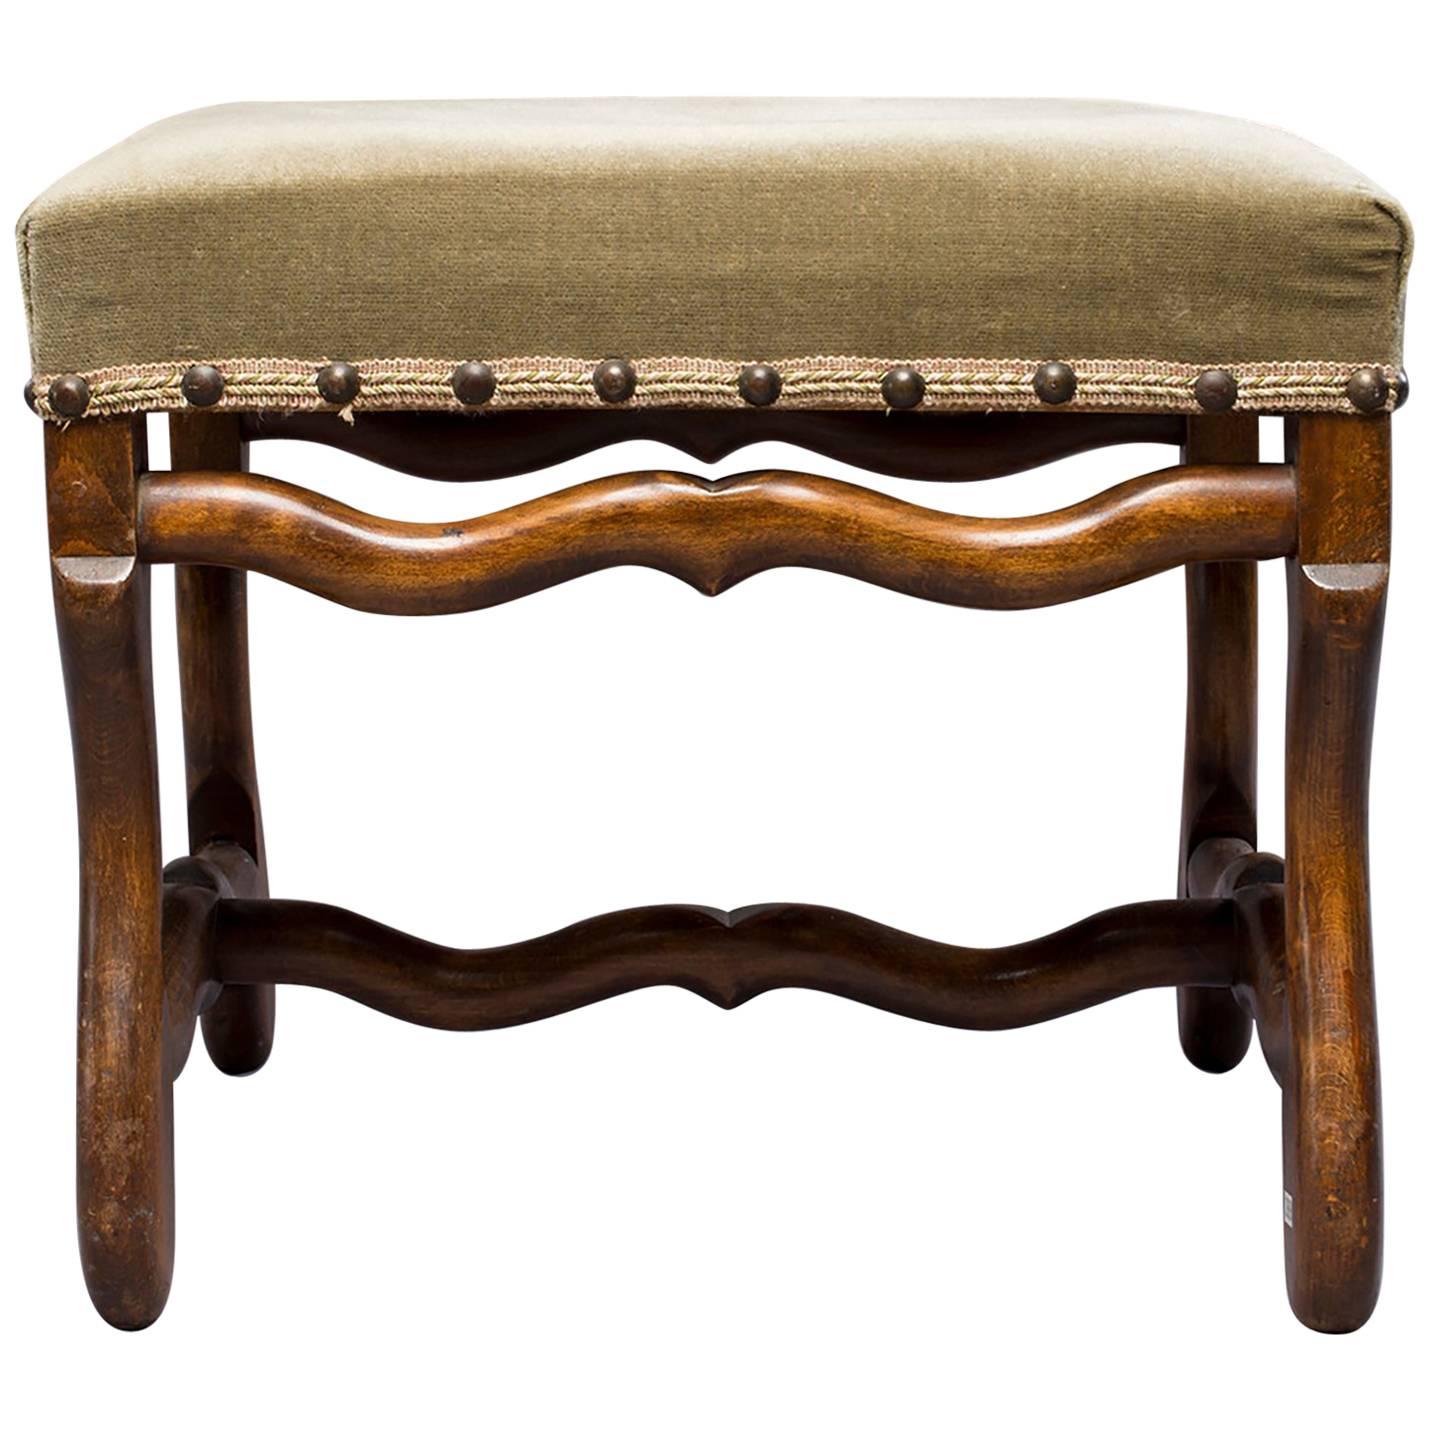 French Early 20th Century Os De Mouton Stool or Bench